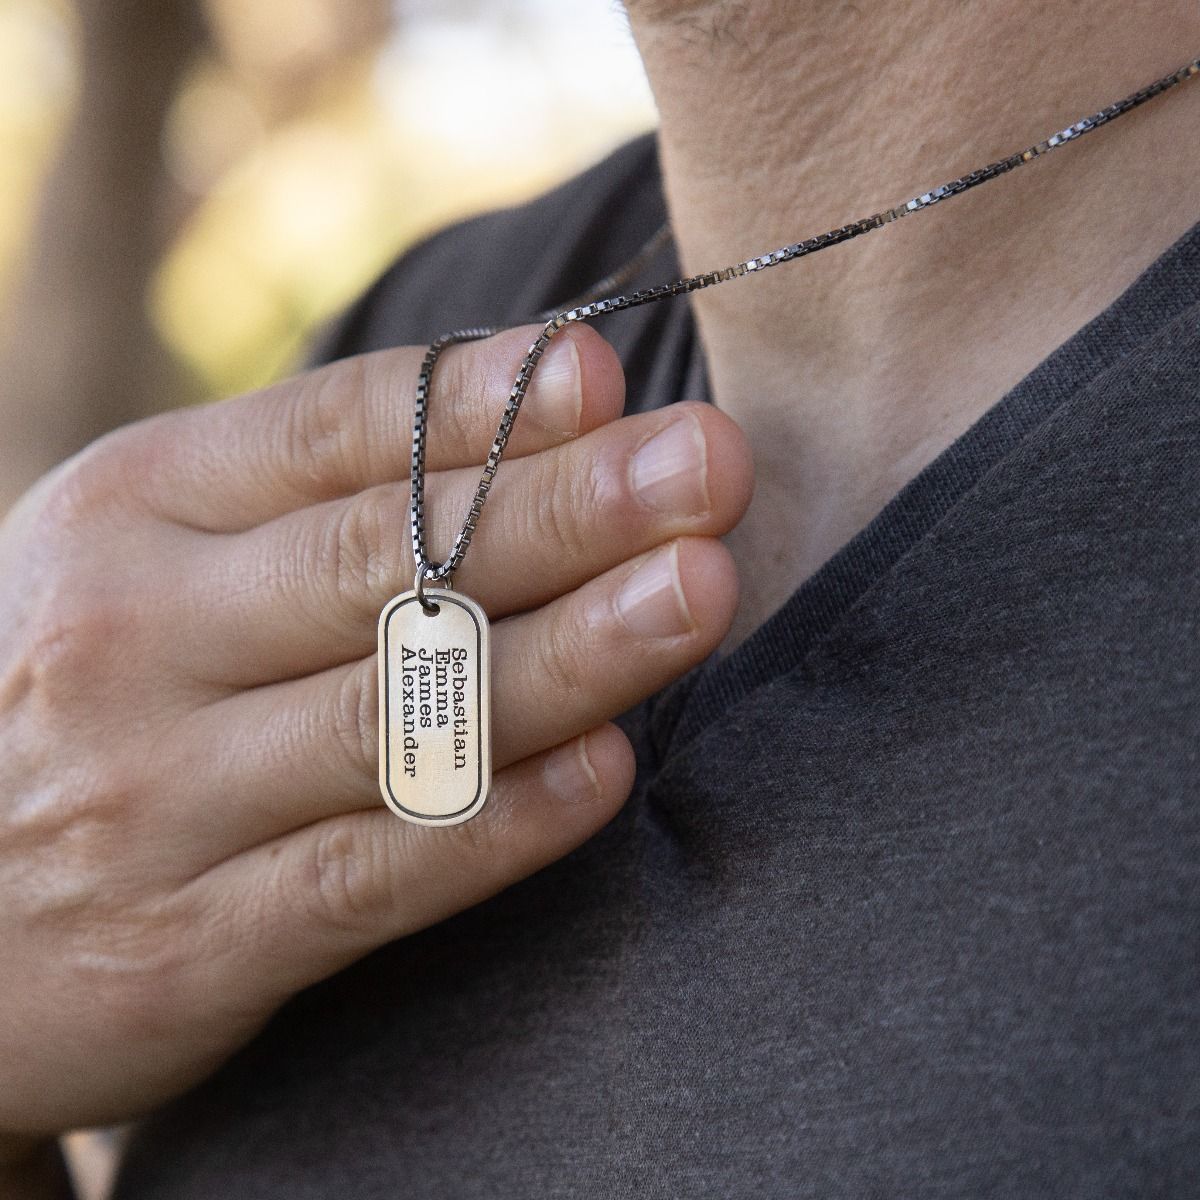 Amazon.com: Engraved Bar Necklace - Sterling Silver Personalized Dog Tag  Necklace - Gold Dog Tag Chain - Rose Gold Custom Dog Tags for Men/Women  Gift : Handmade Products